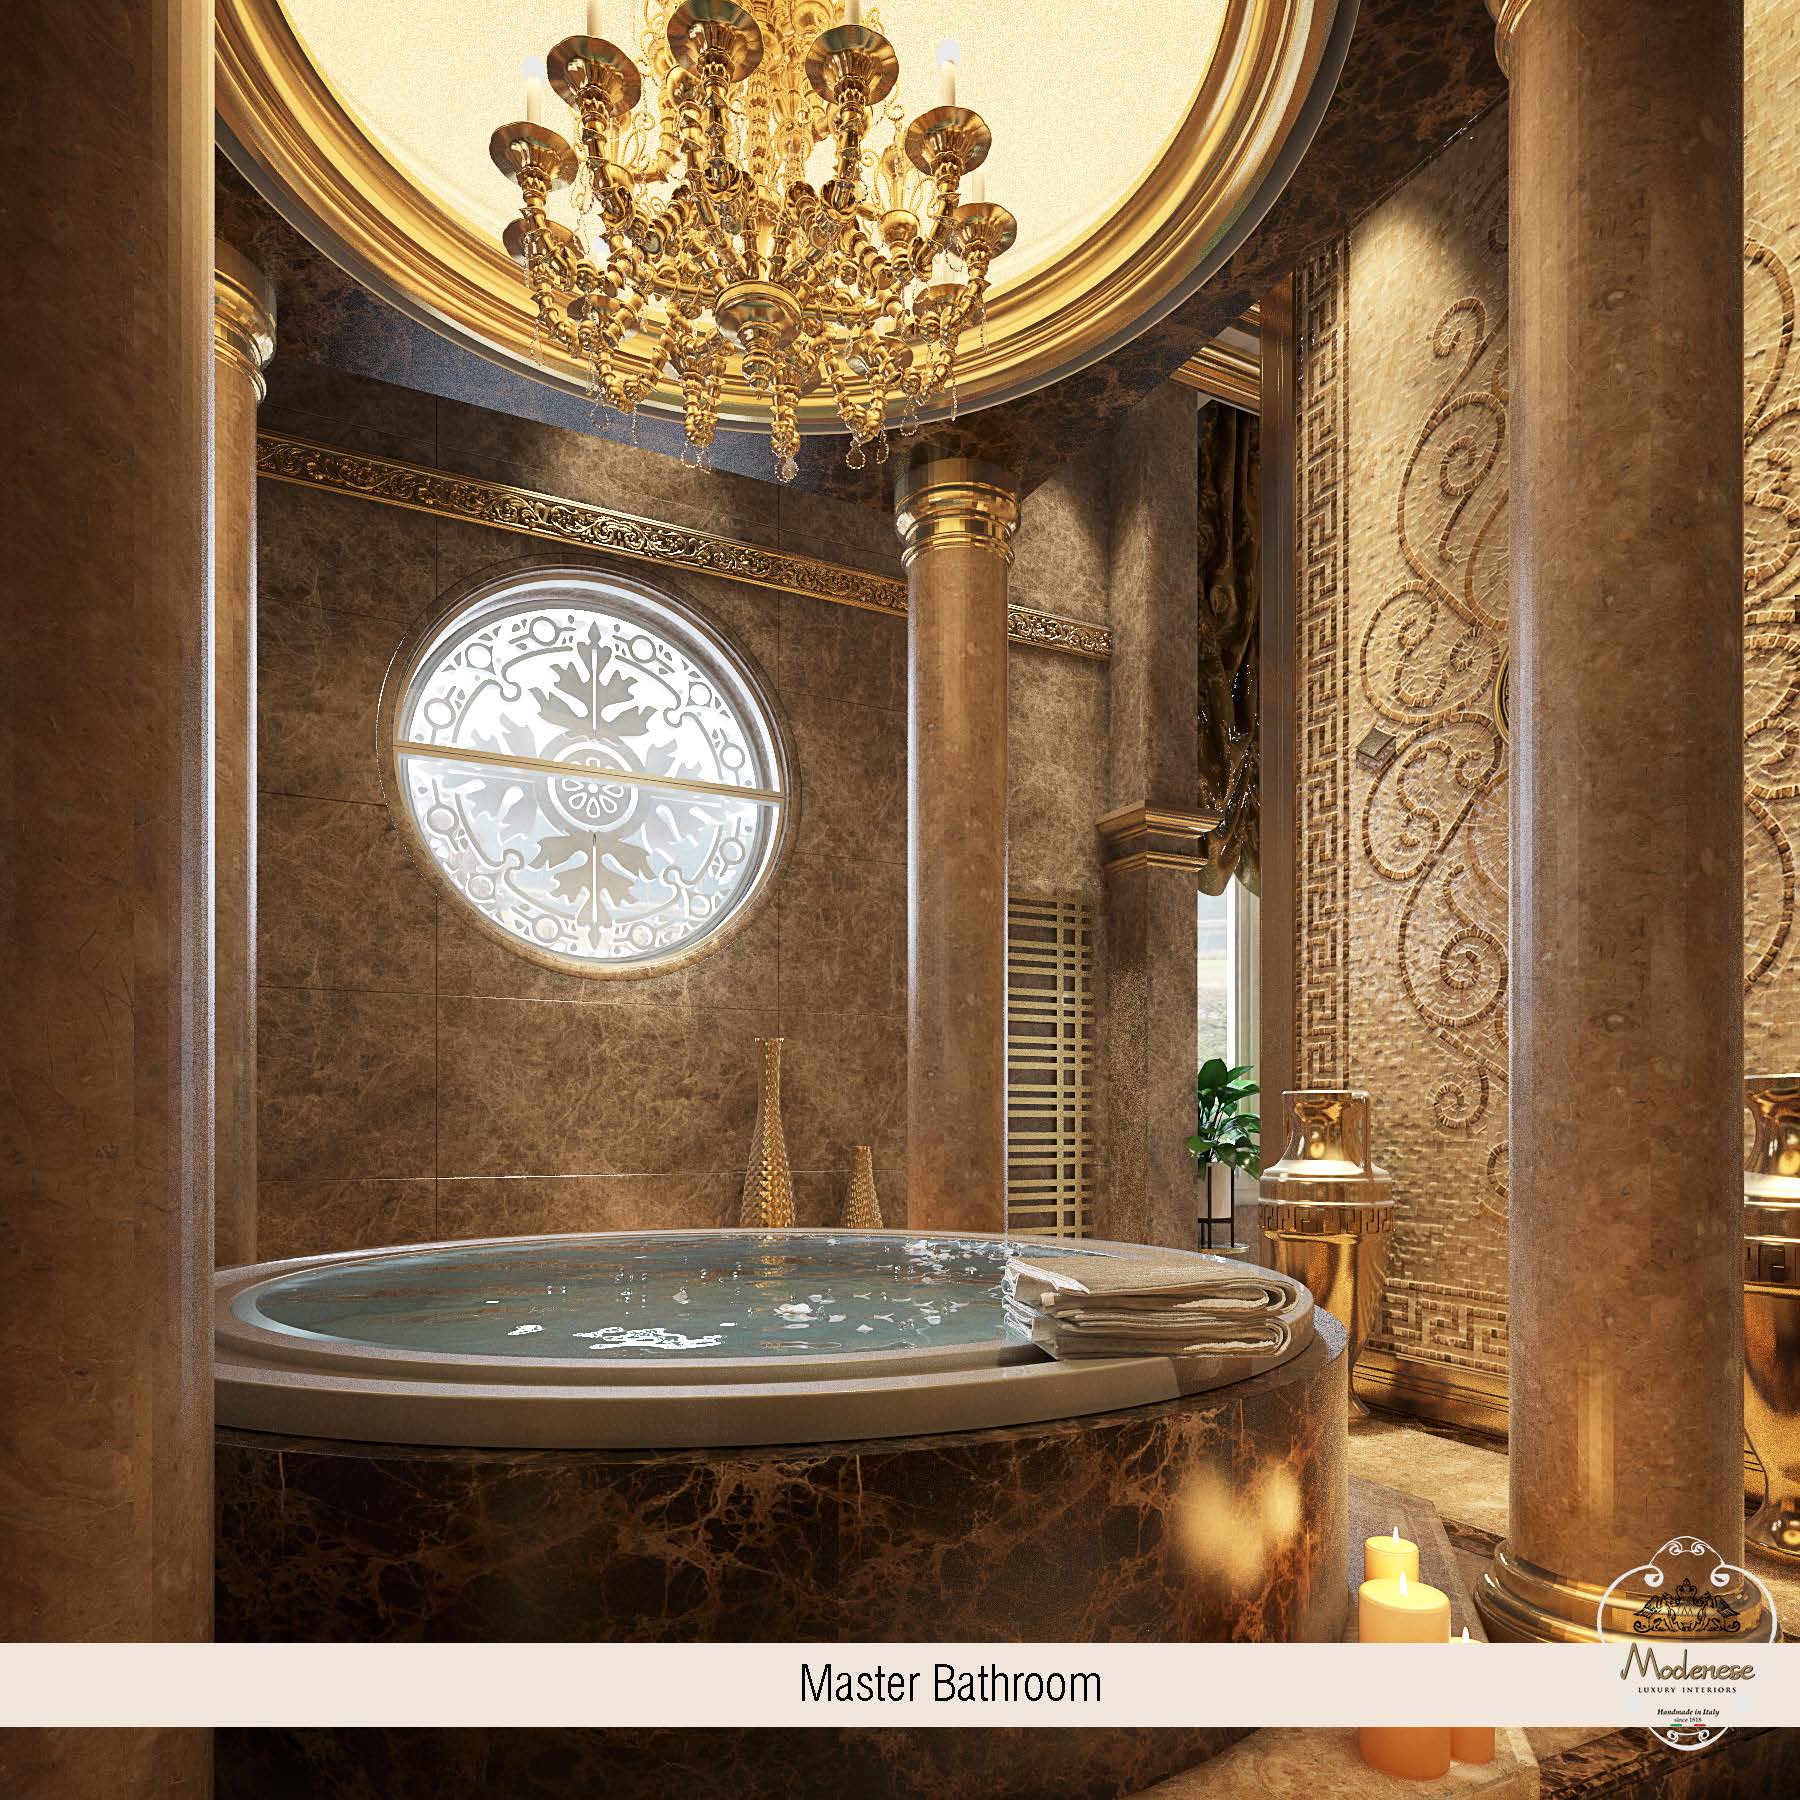 Customized furniture project, elegant handcrafted furniture. Classical master bathroom design, Italian unique and exclusive design. Exclusive furniture manufacturing in Italy